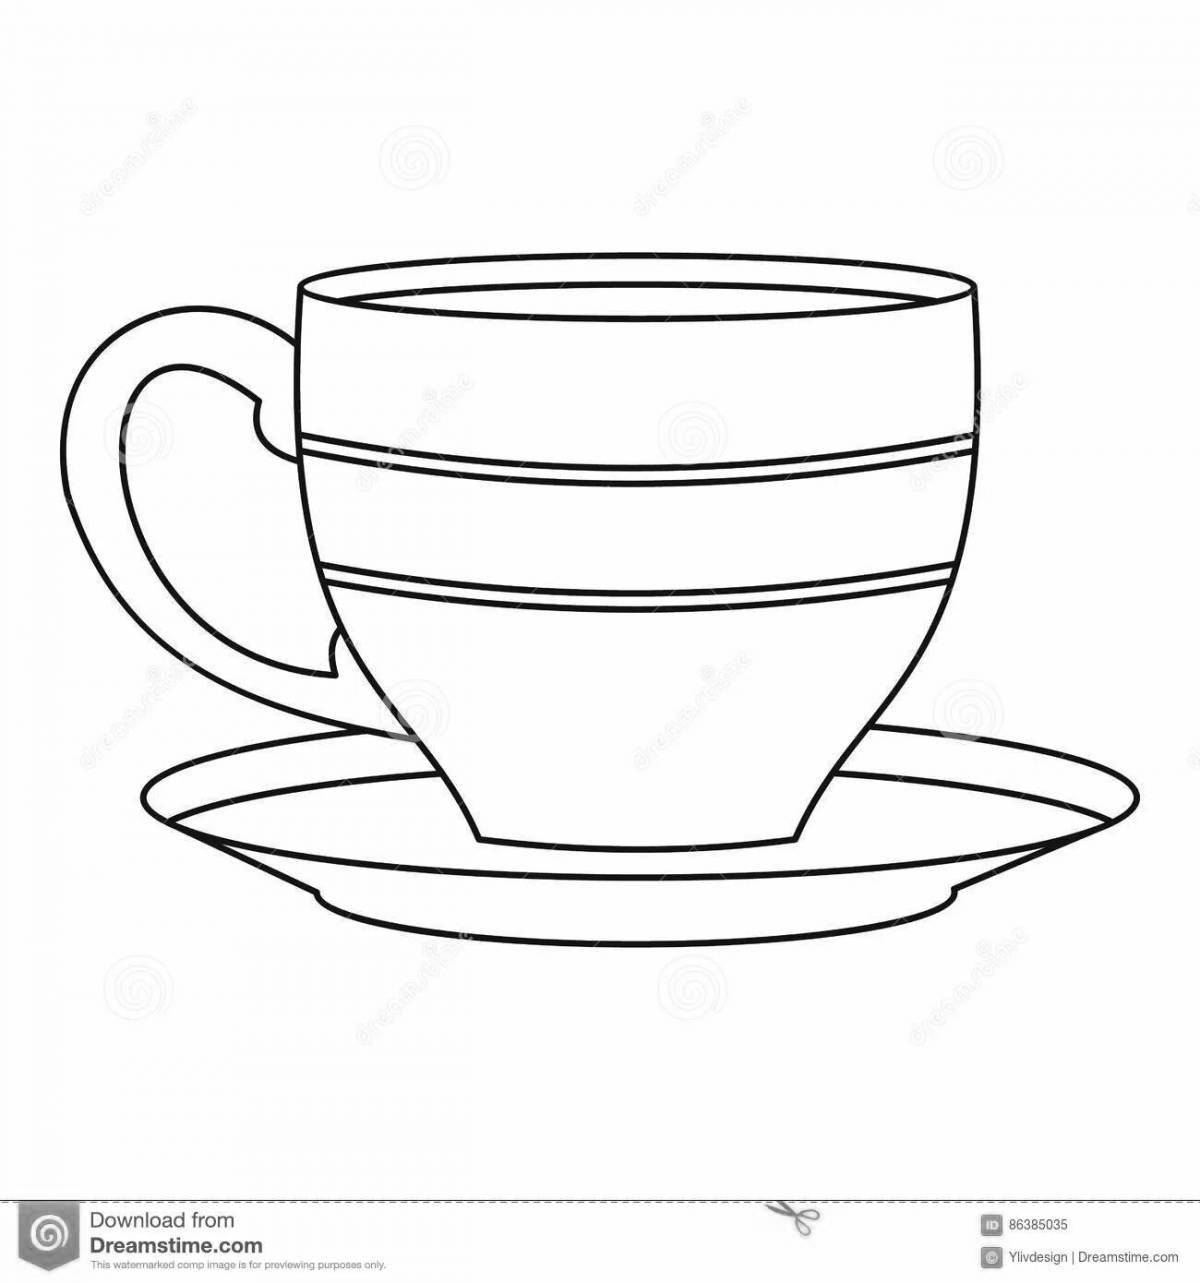 Elegant cup and saucer applique template